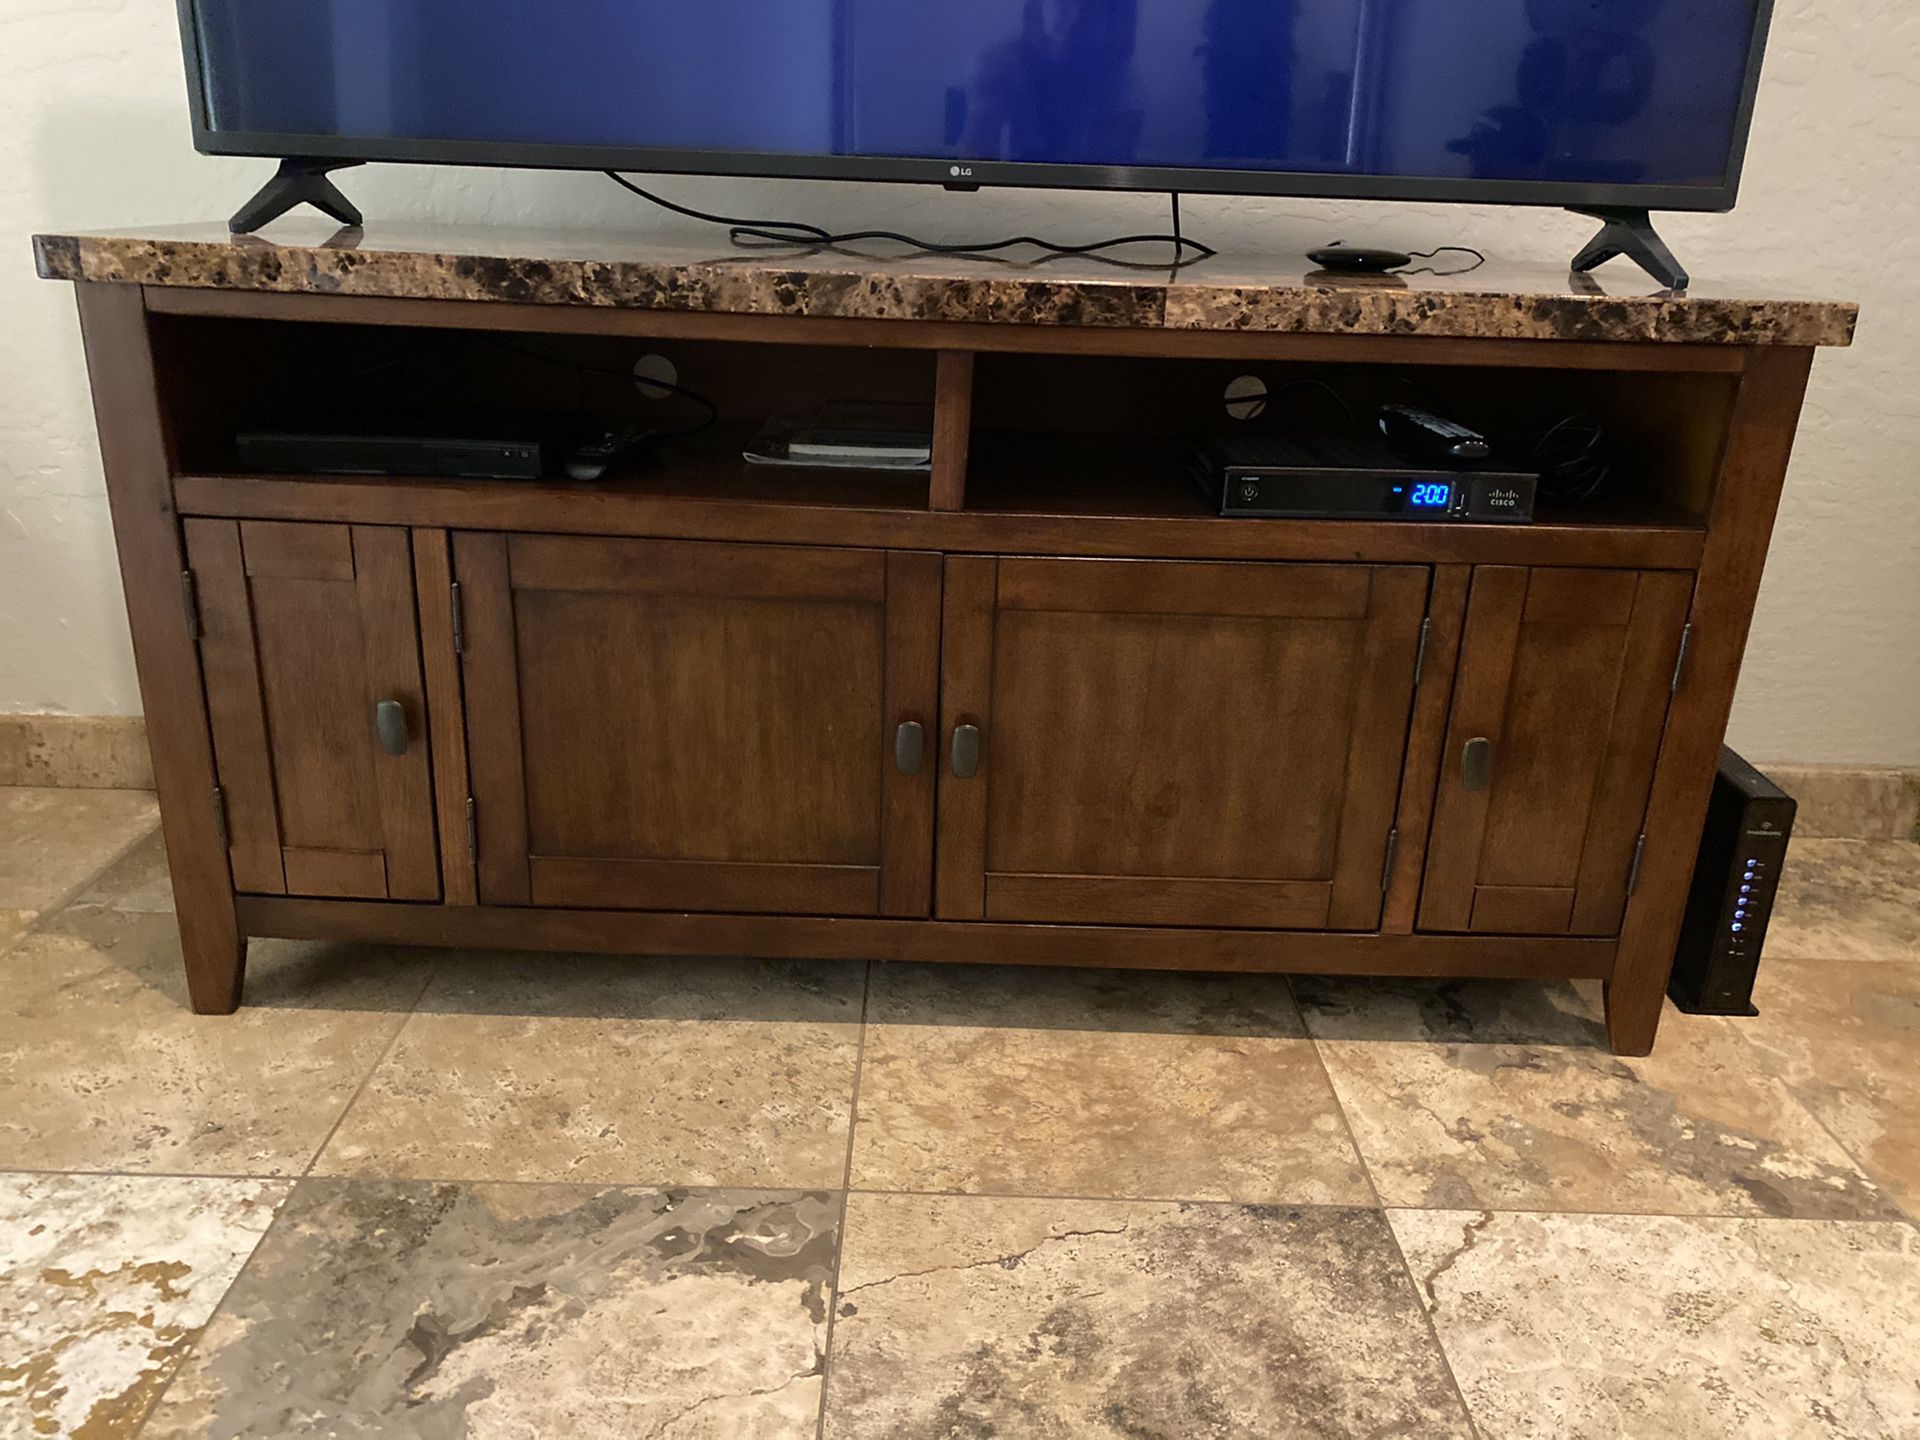 Beautiful marble top tv stand. Fits a 65” nicely